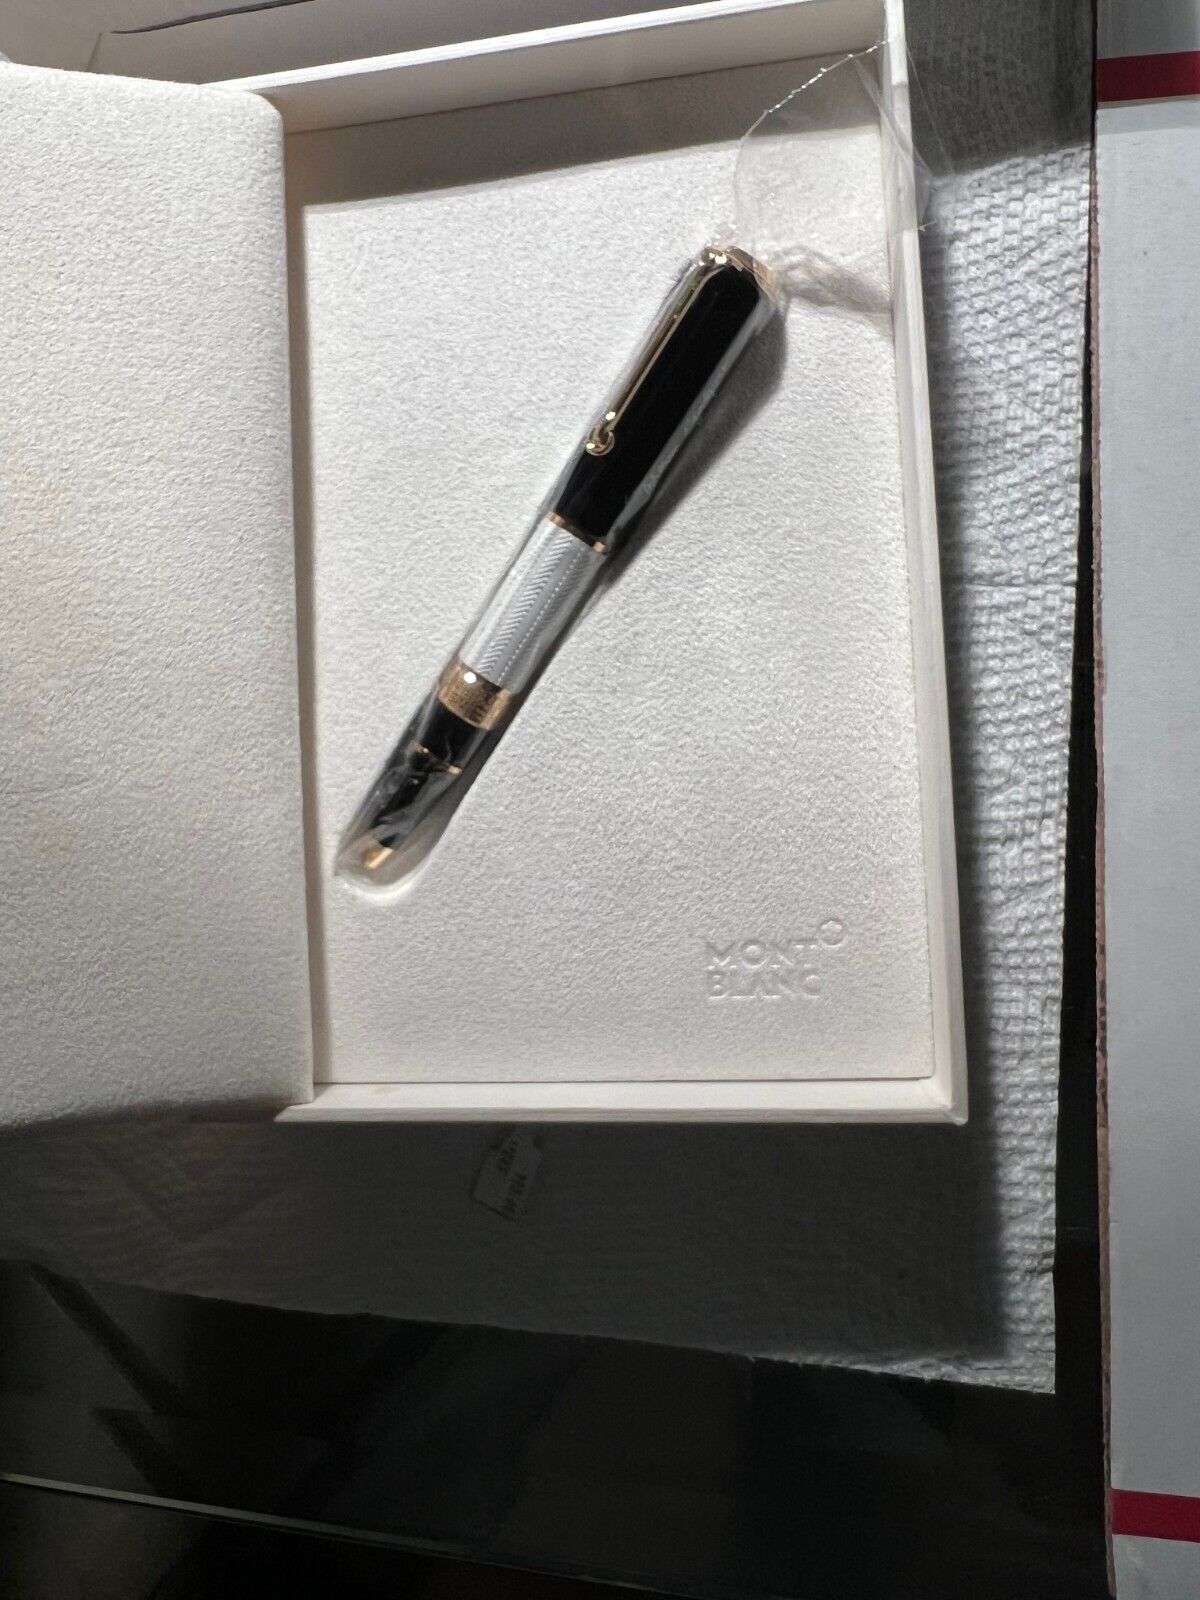 New Montblanc 2016 Limited Writer Edition William Shakespeare Ball Point Pen